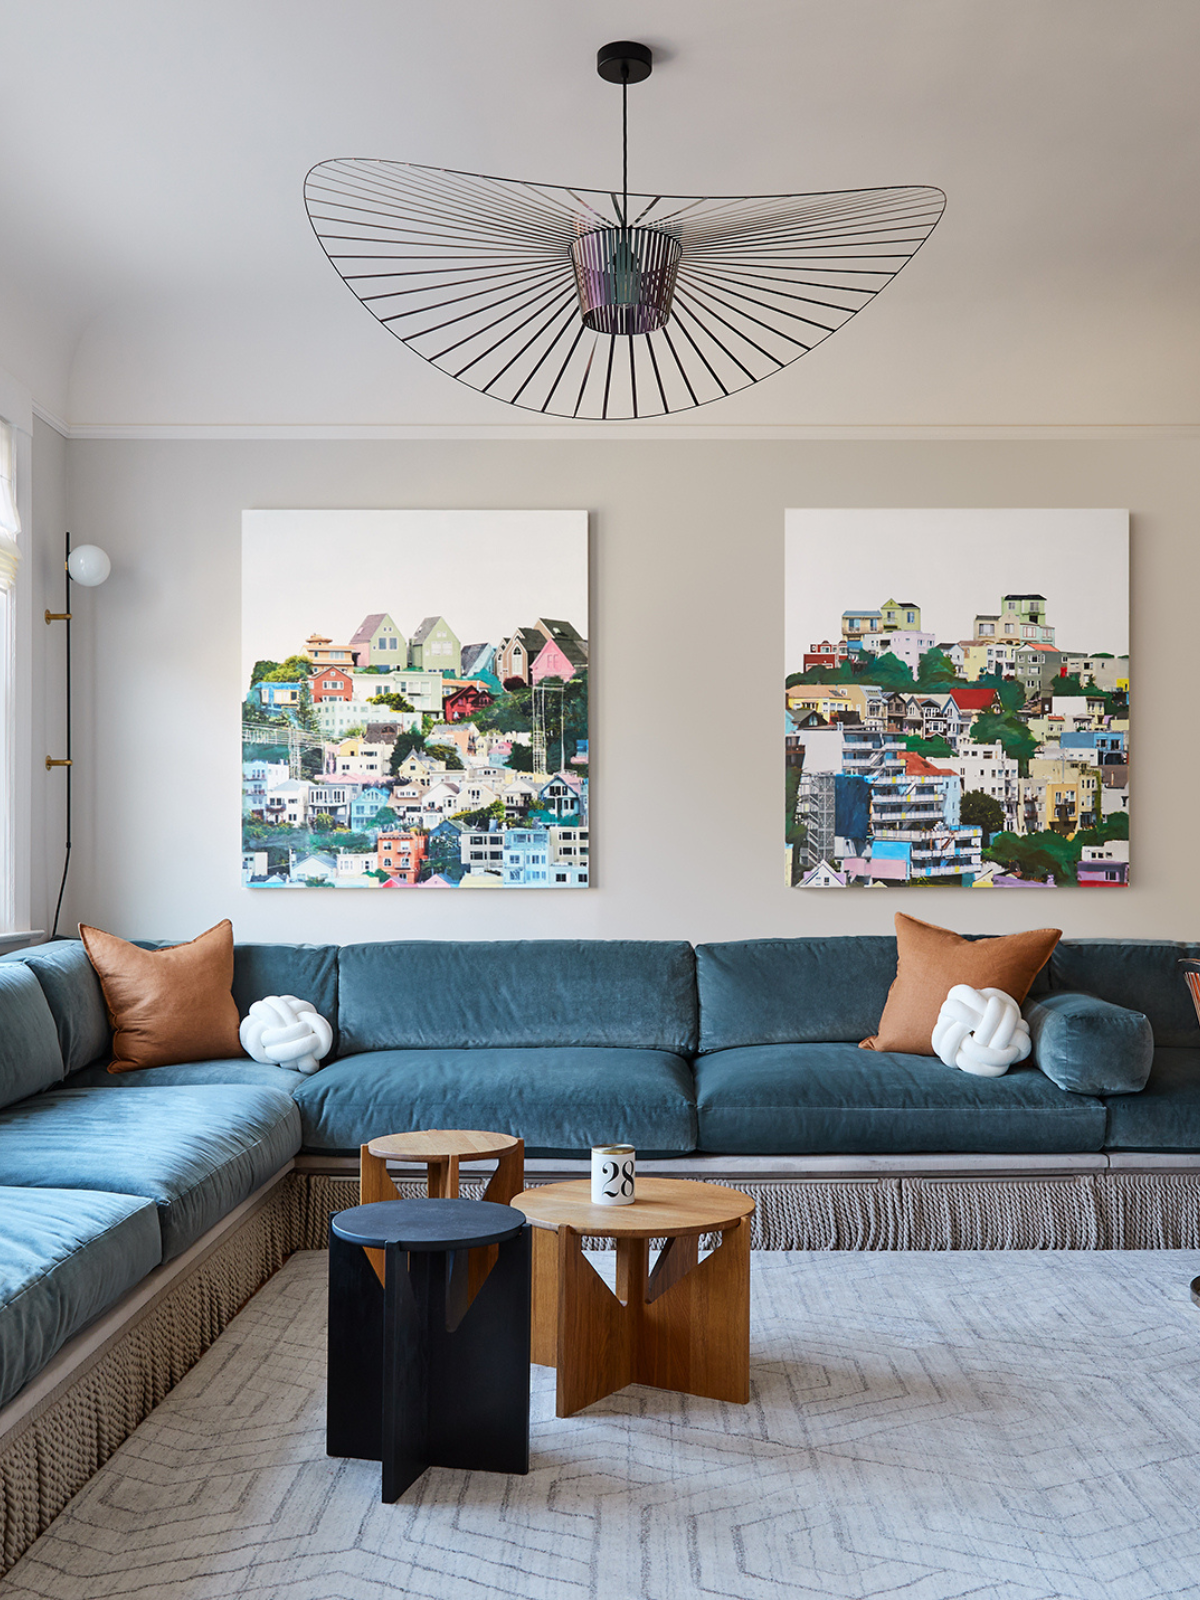 living room showing blue an L-shape sofa, rug, wall accent arts and modern pendant light